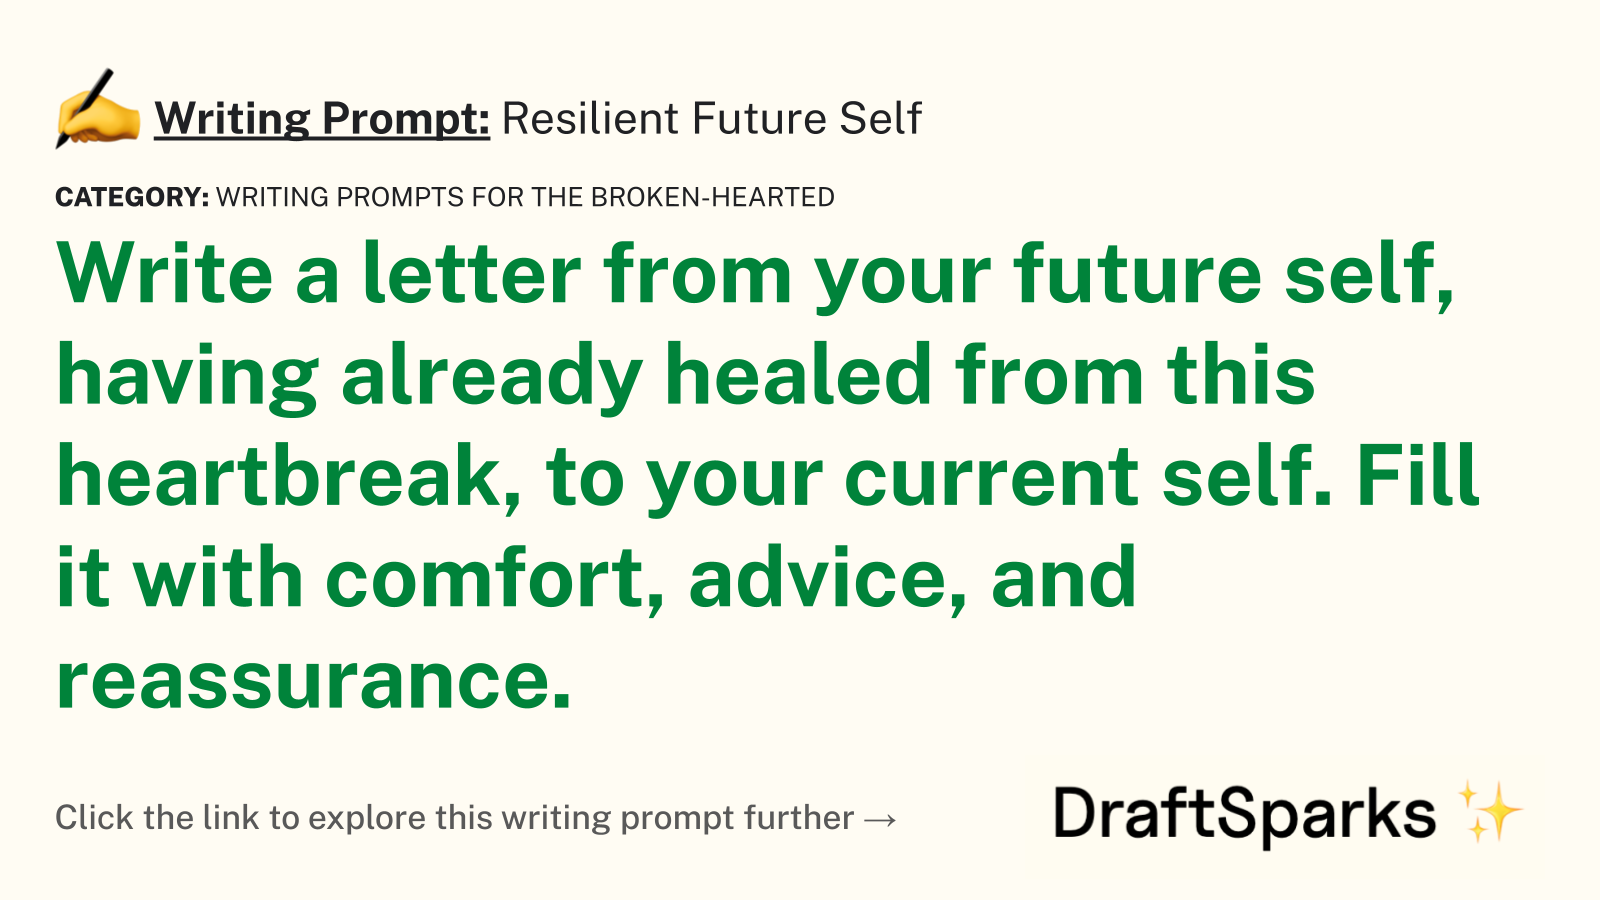 Resilient Future Self